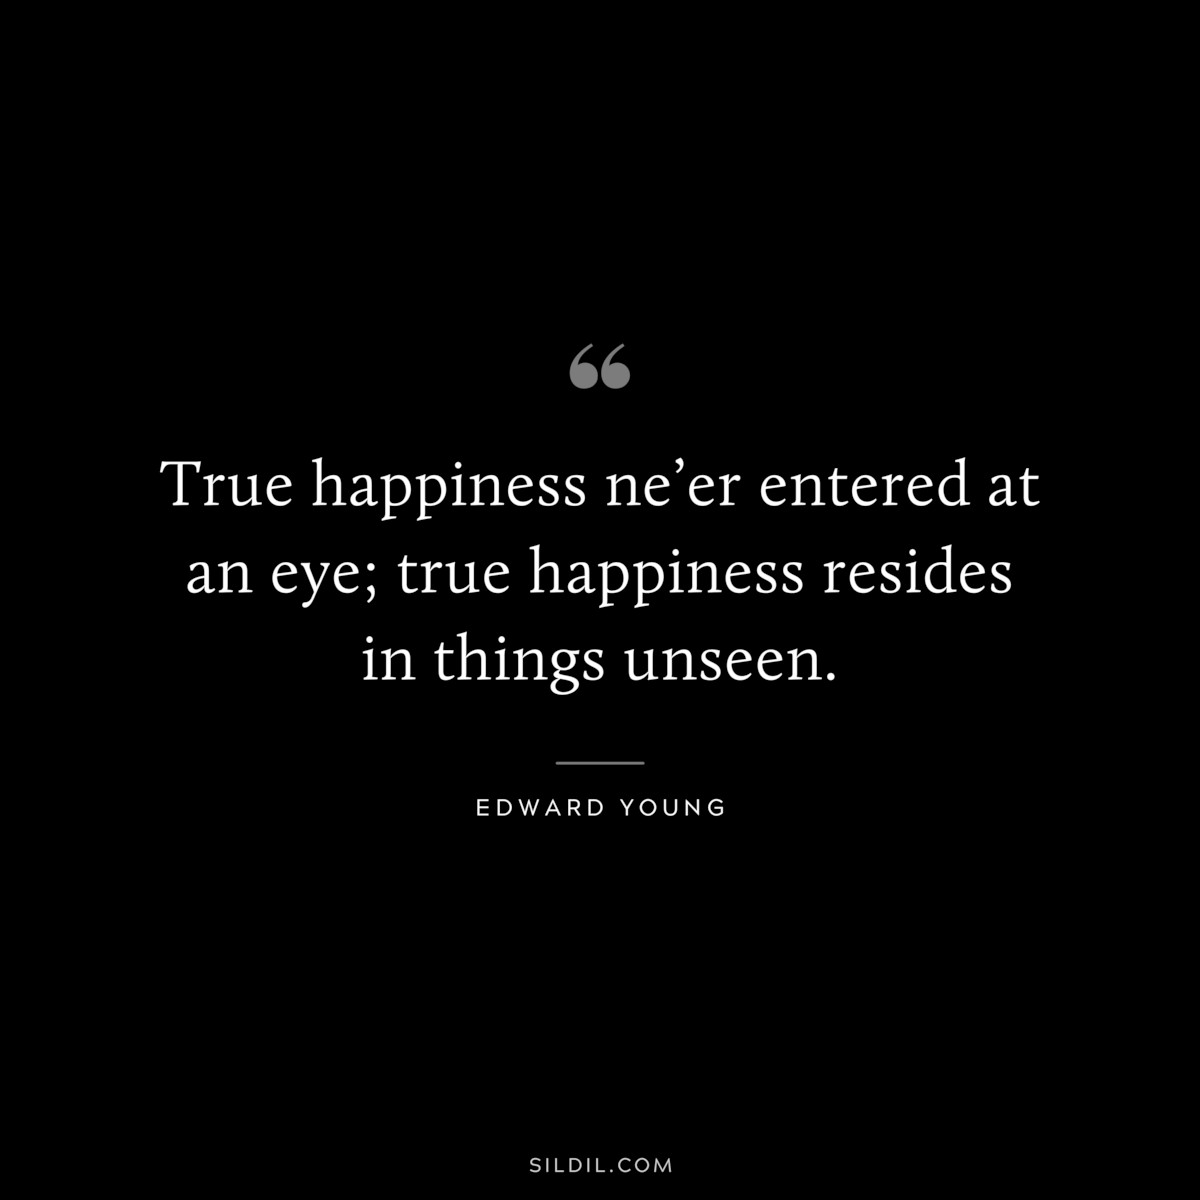 True happiness ne’er entered at an eye; true happiness resides in things unseen. ― Edward Young